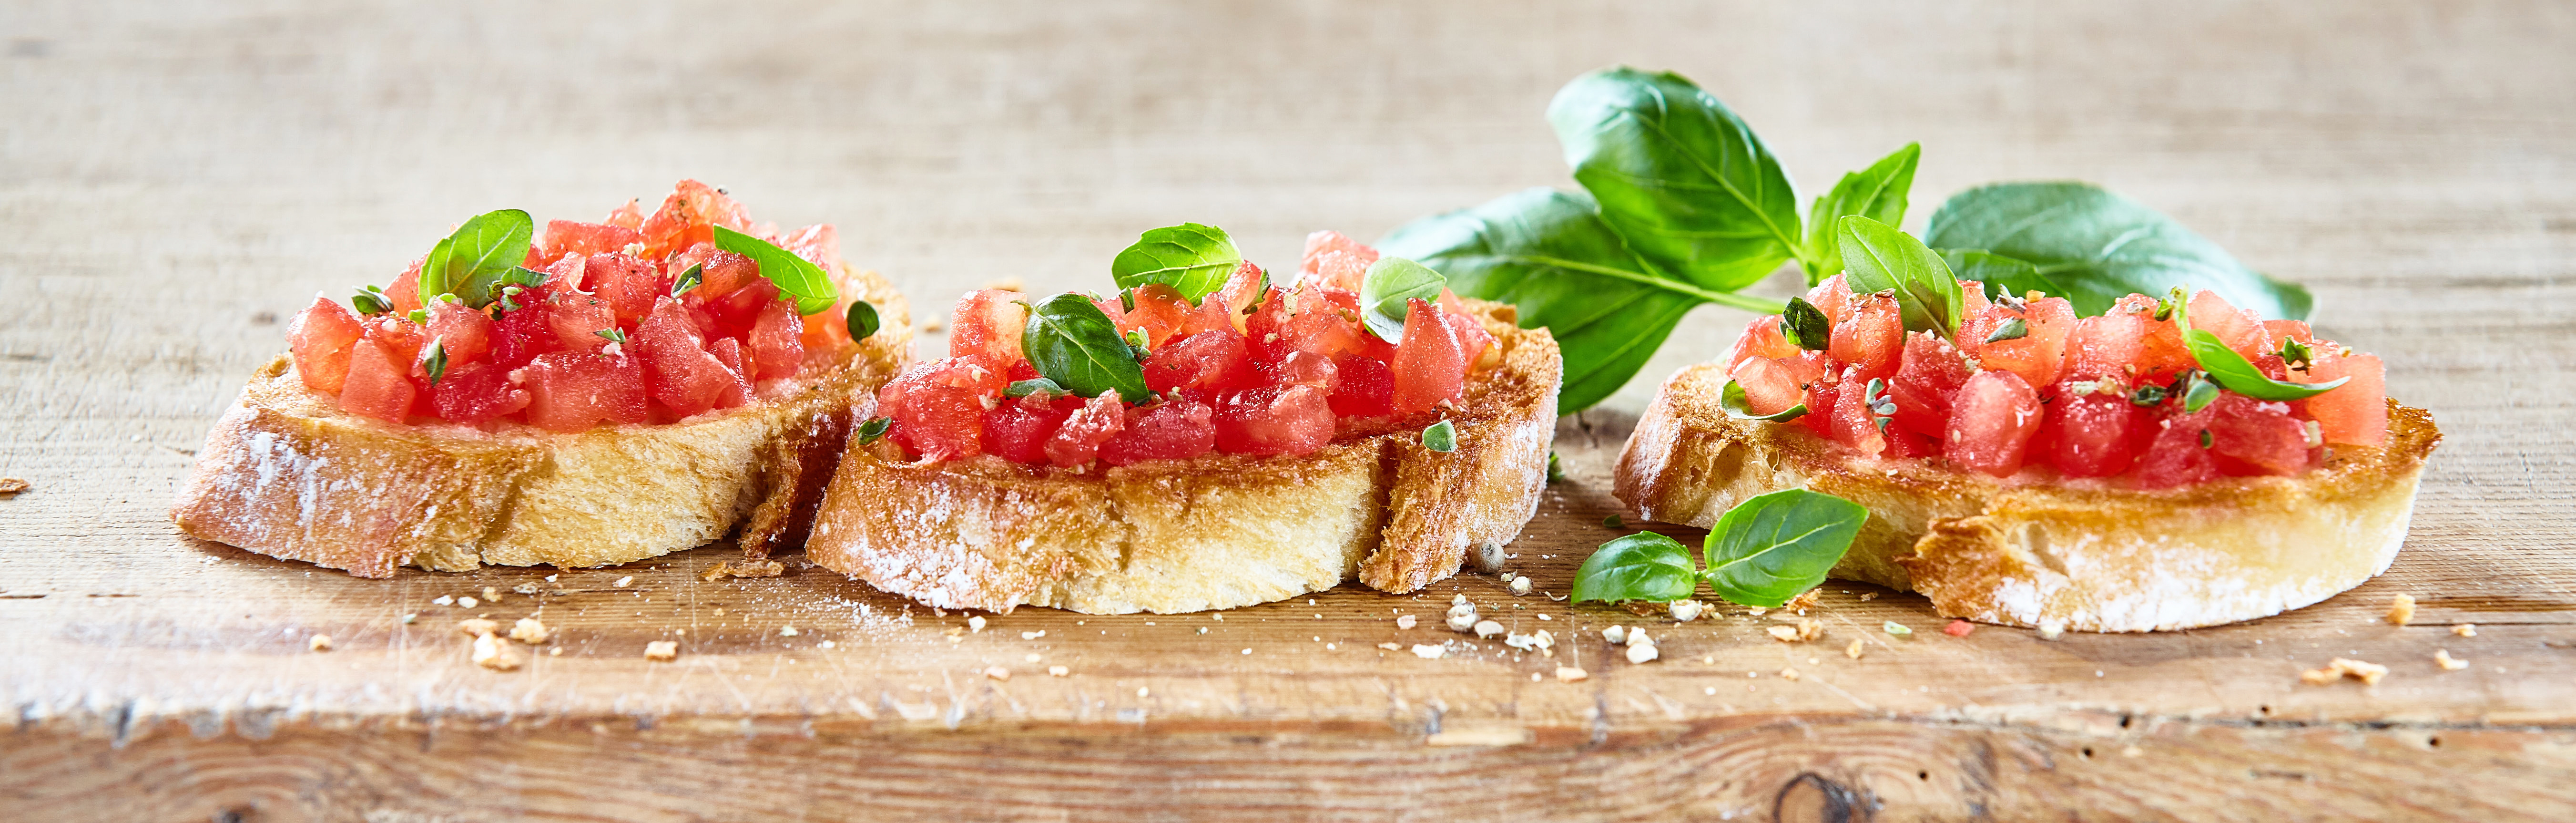 Delicious seasoned savory Italian tomato bruschetta slices on a rustic wooden board garnished with fresh basil leaves, horizontal banner